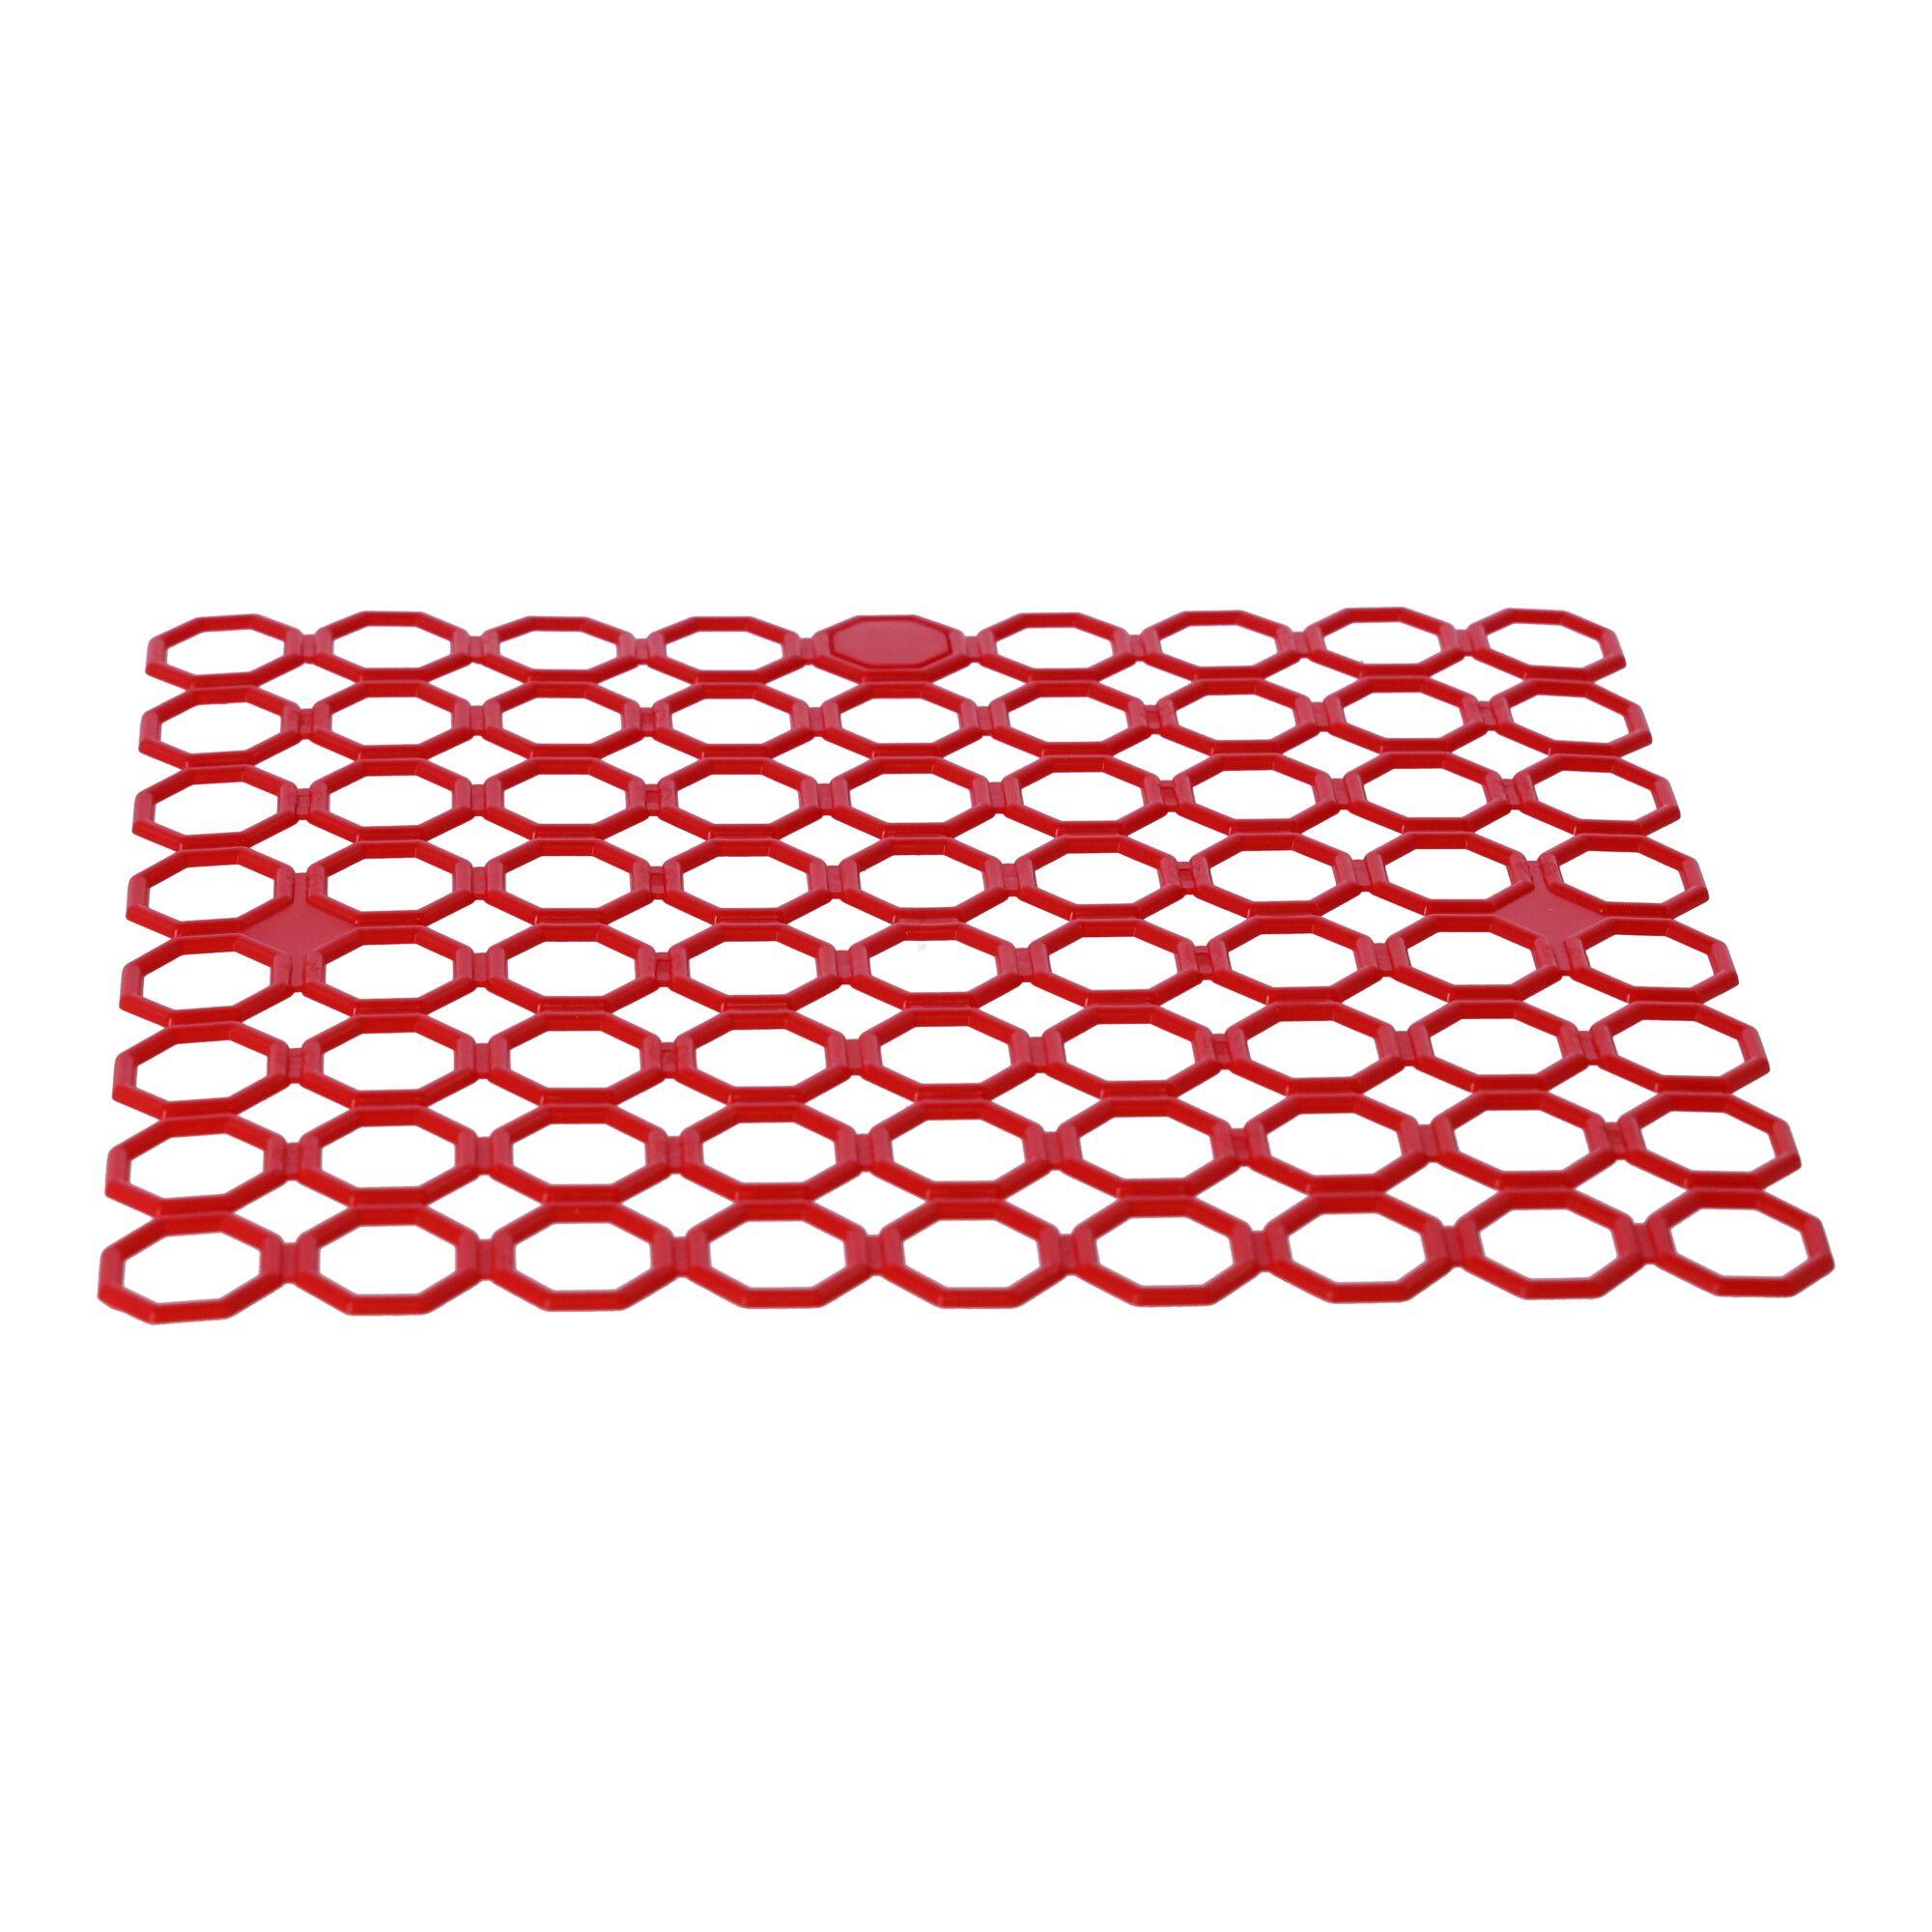 Grille mat sink insert, square POLISH PRODUCT